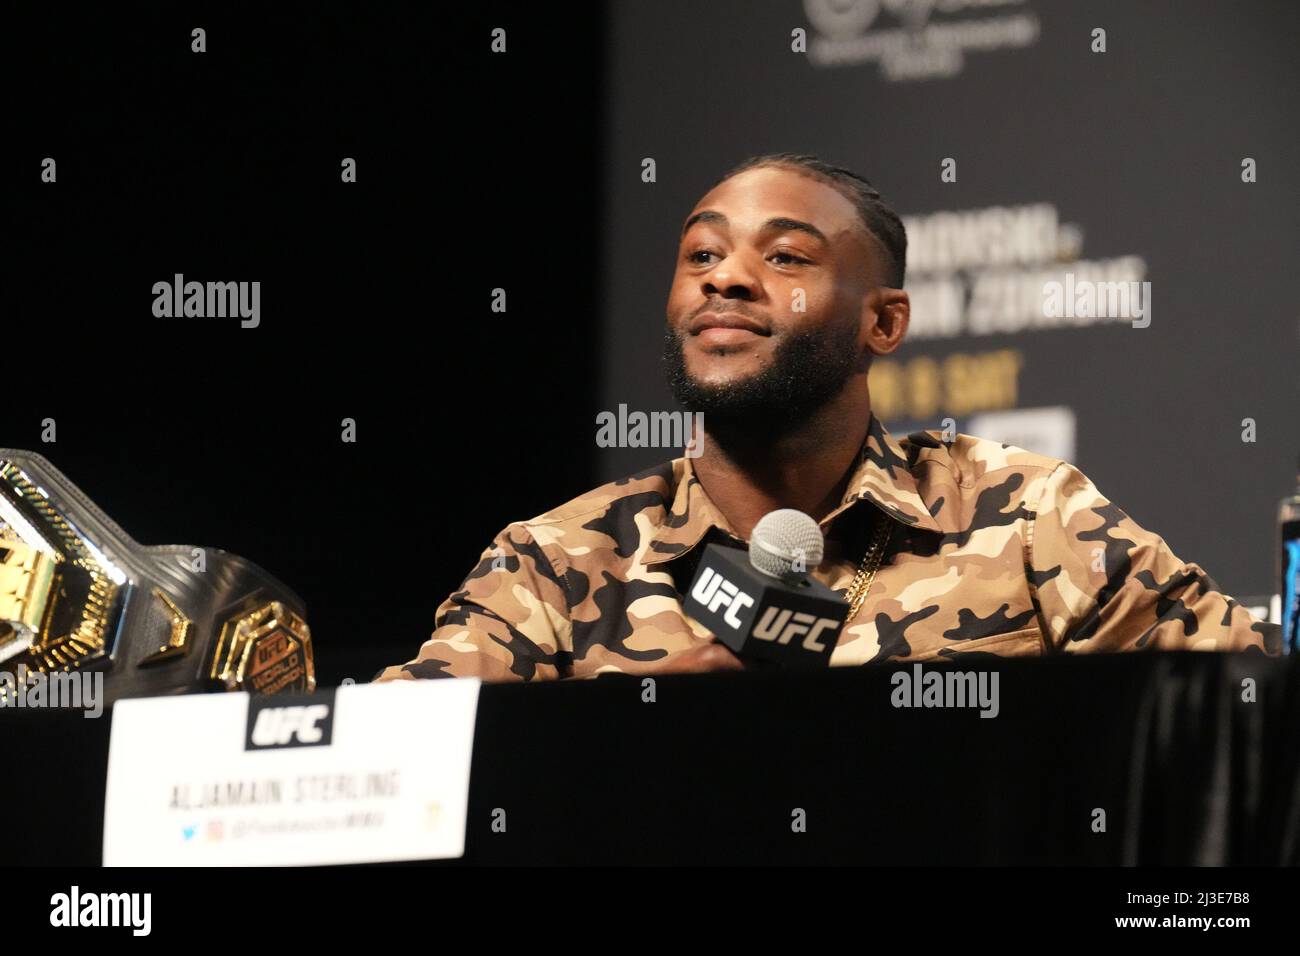 JACKSONVILLE, FL - April 7: Aljamain Sterling displays his Jaguars helmet in support of the locals while he meets with the press and the fans for the press conference at Hyatt Regency Waterfront for UFC 273 - Volkanovski vs The Korean  - Presser on April 7, 2022 in Jacksonville, Florida, United States. (Photo by Louis Grasse/PxImages) Stock Photo